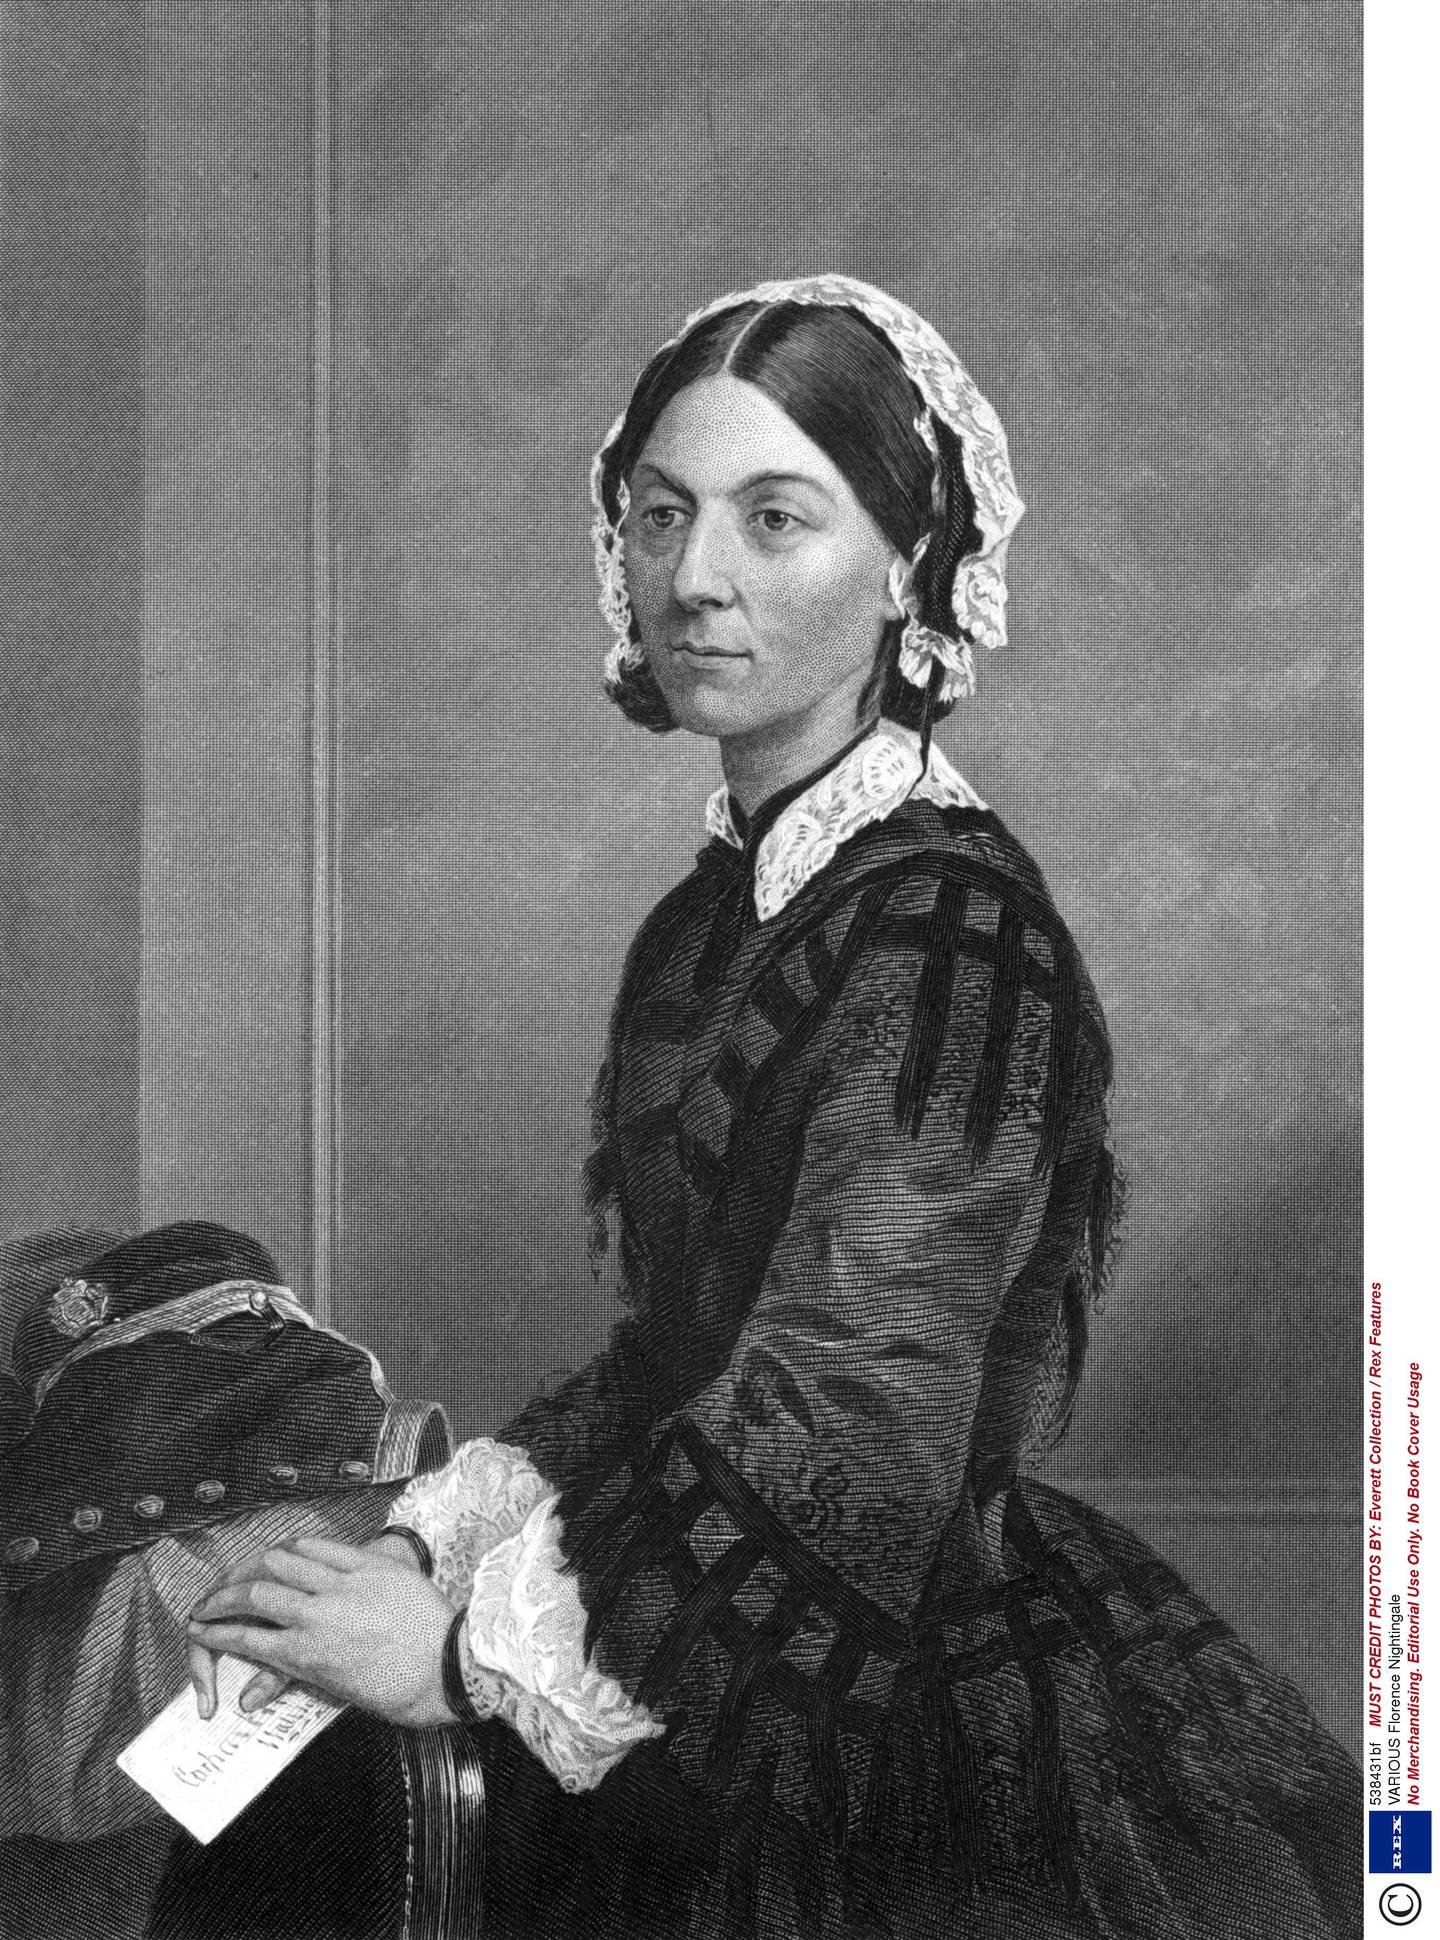 No Merchandising. Editorial Use Only. No Book Cover Usage
Mandatory Credit: Photo by Everett Collection / Rex Features ( 538431bf )
Florence Nightingale
VARIOUS

